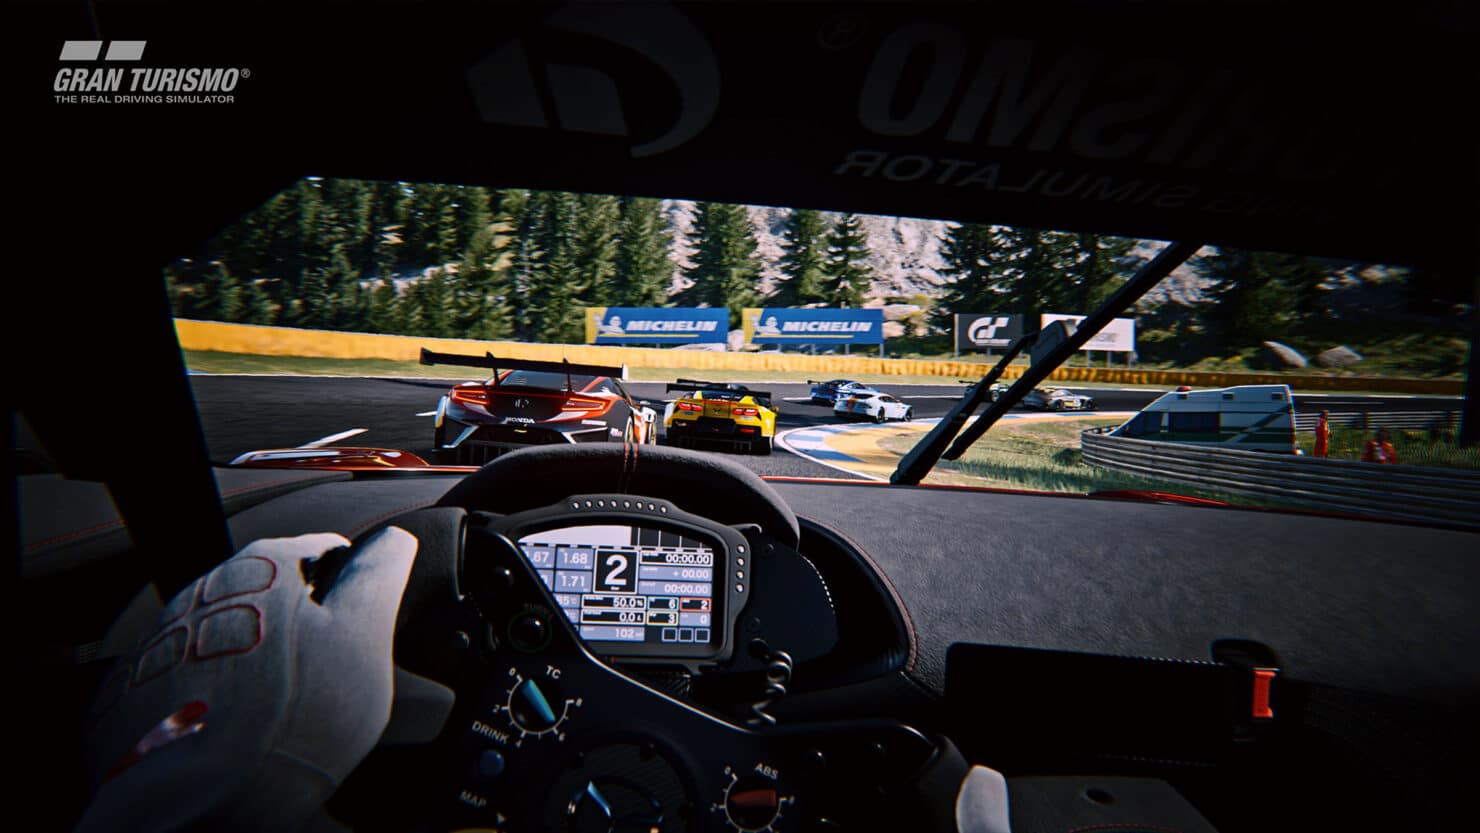 Gran Turismo 7 is playable again after more than 24 hours down